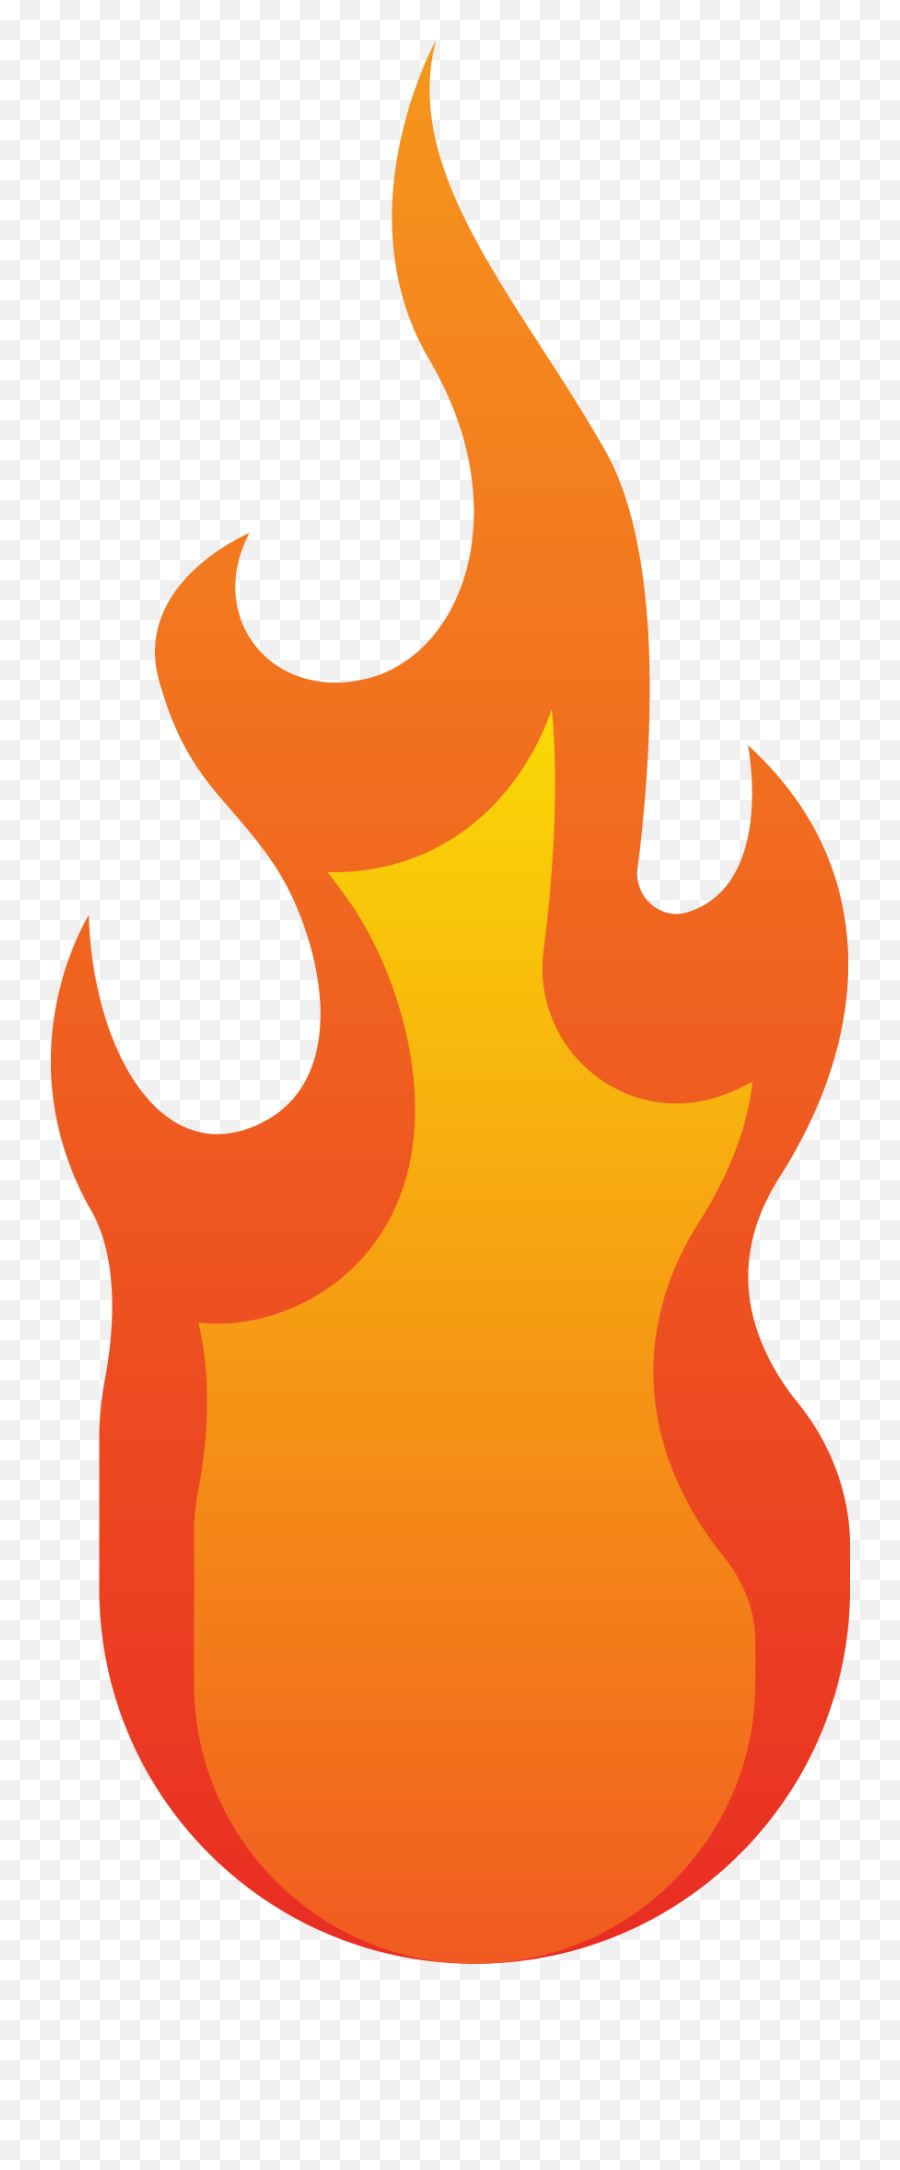 Fire Flame Combustion - Fire Transparent Background Cartoon Png,Fire Sparks Png